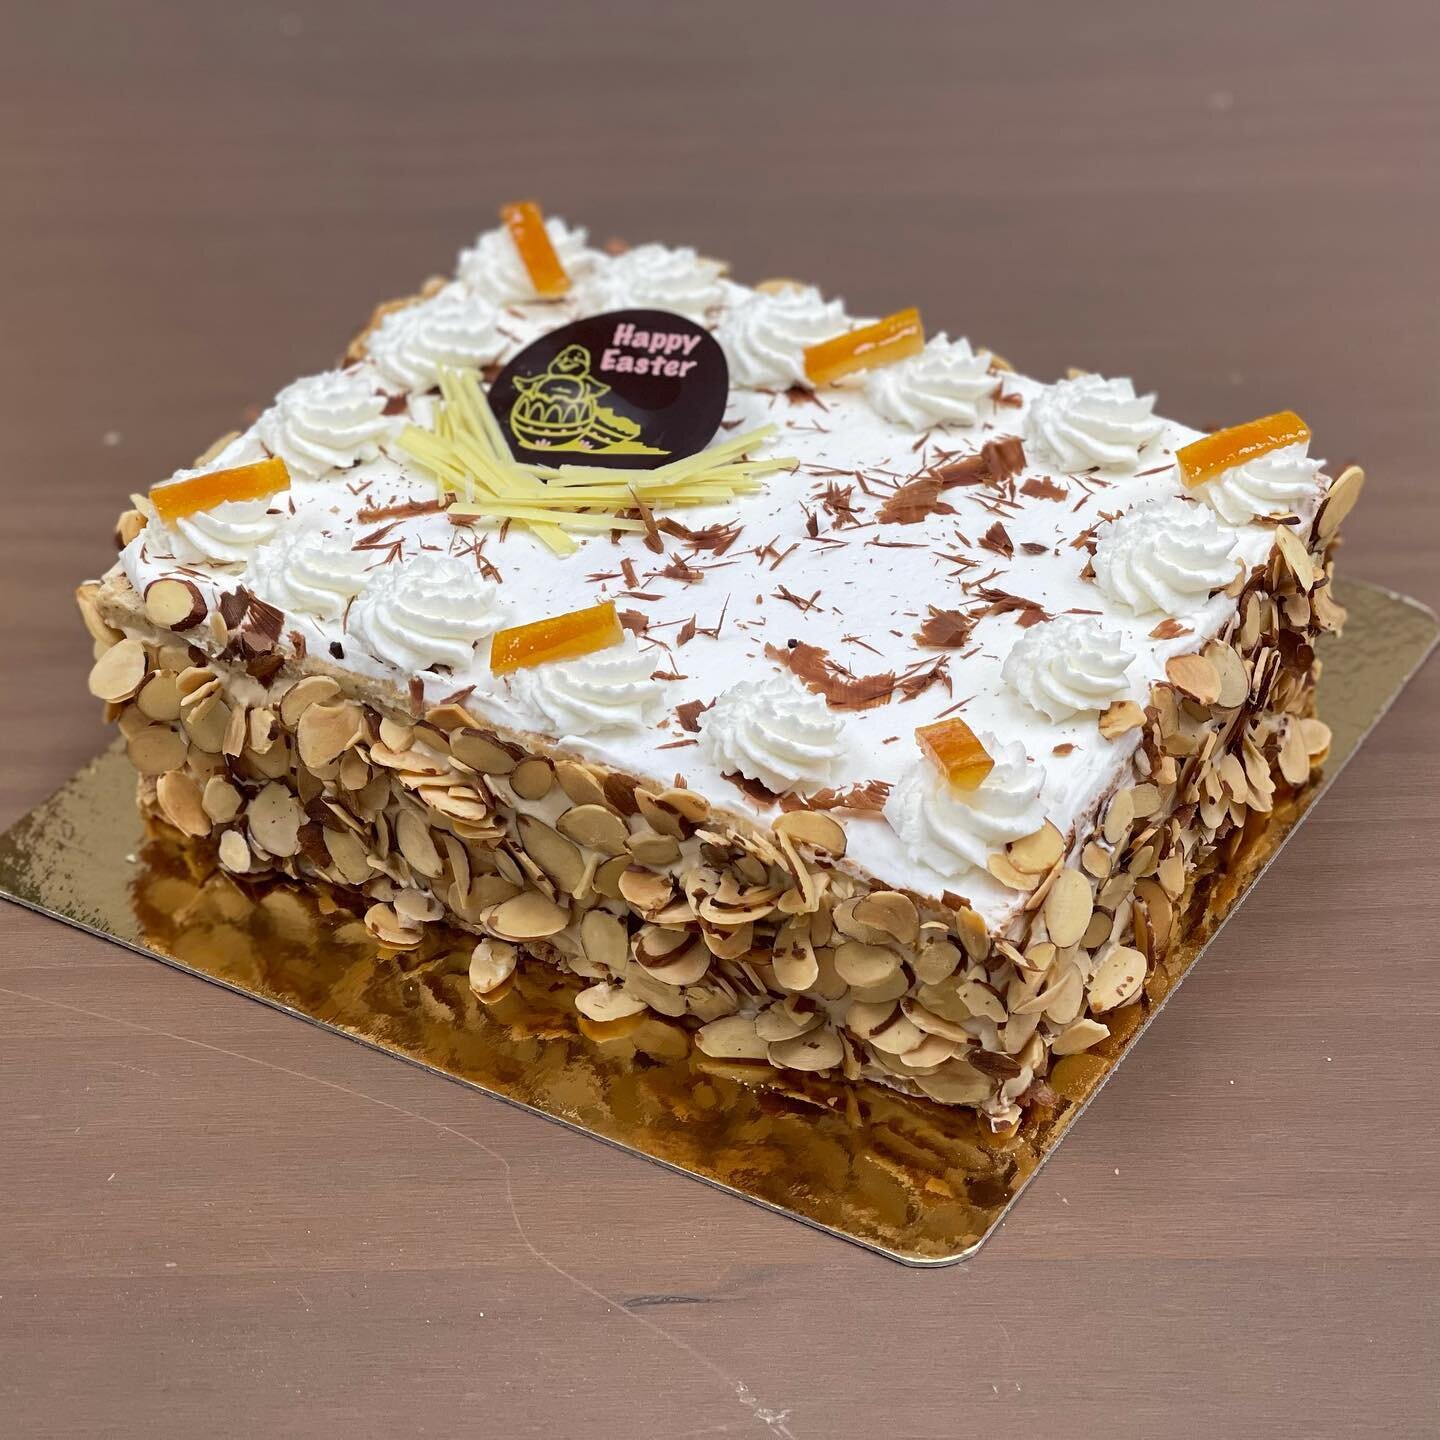 This year for Easter, we will introduce the Ribeaupierre au Cointreau, a crowd favorite in our bakery back in France. 
Two layers of almond/hazelnut dacquoise, a soft g&eacute;noise delicately soaked with Cointreau, garnished with a light vanilla pas